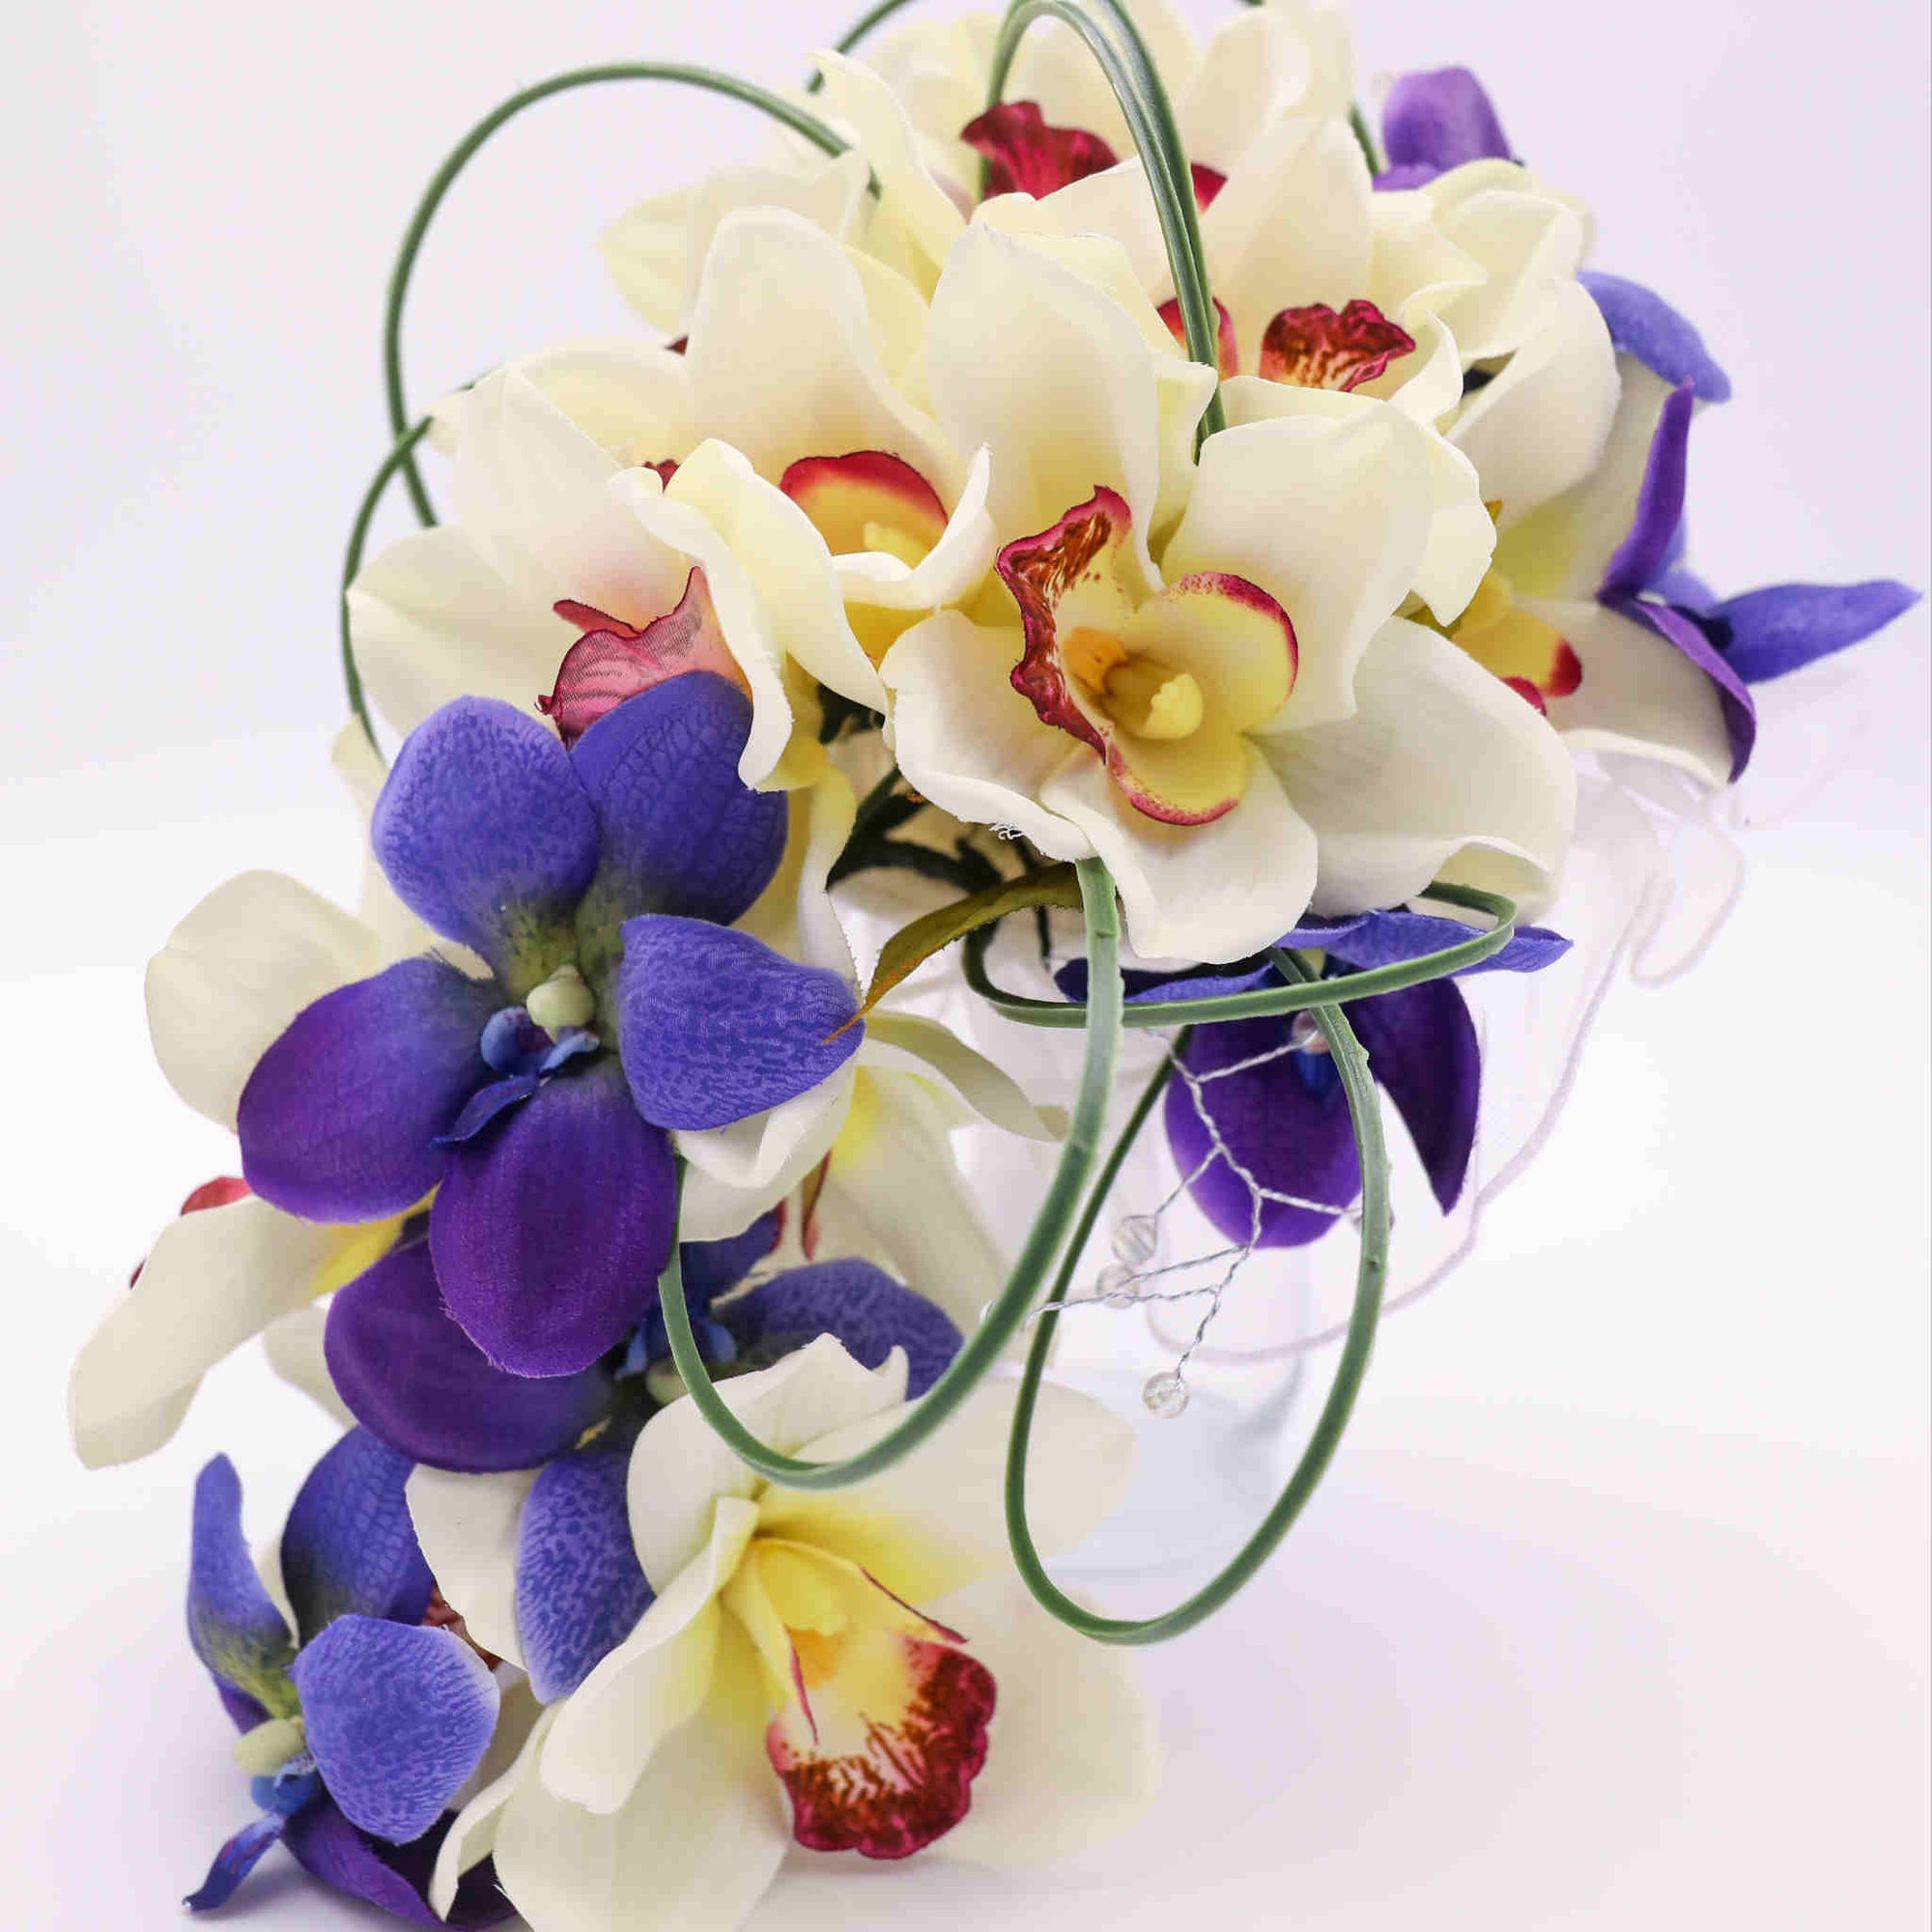 Created with silk orchids and various accent tropical flowers, greenery and clear sparkle stems, the bouquet sits atop a handle wrapped in satin to be both beautiful and comfortable.